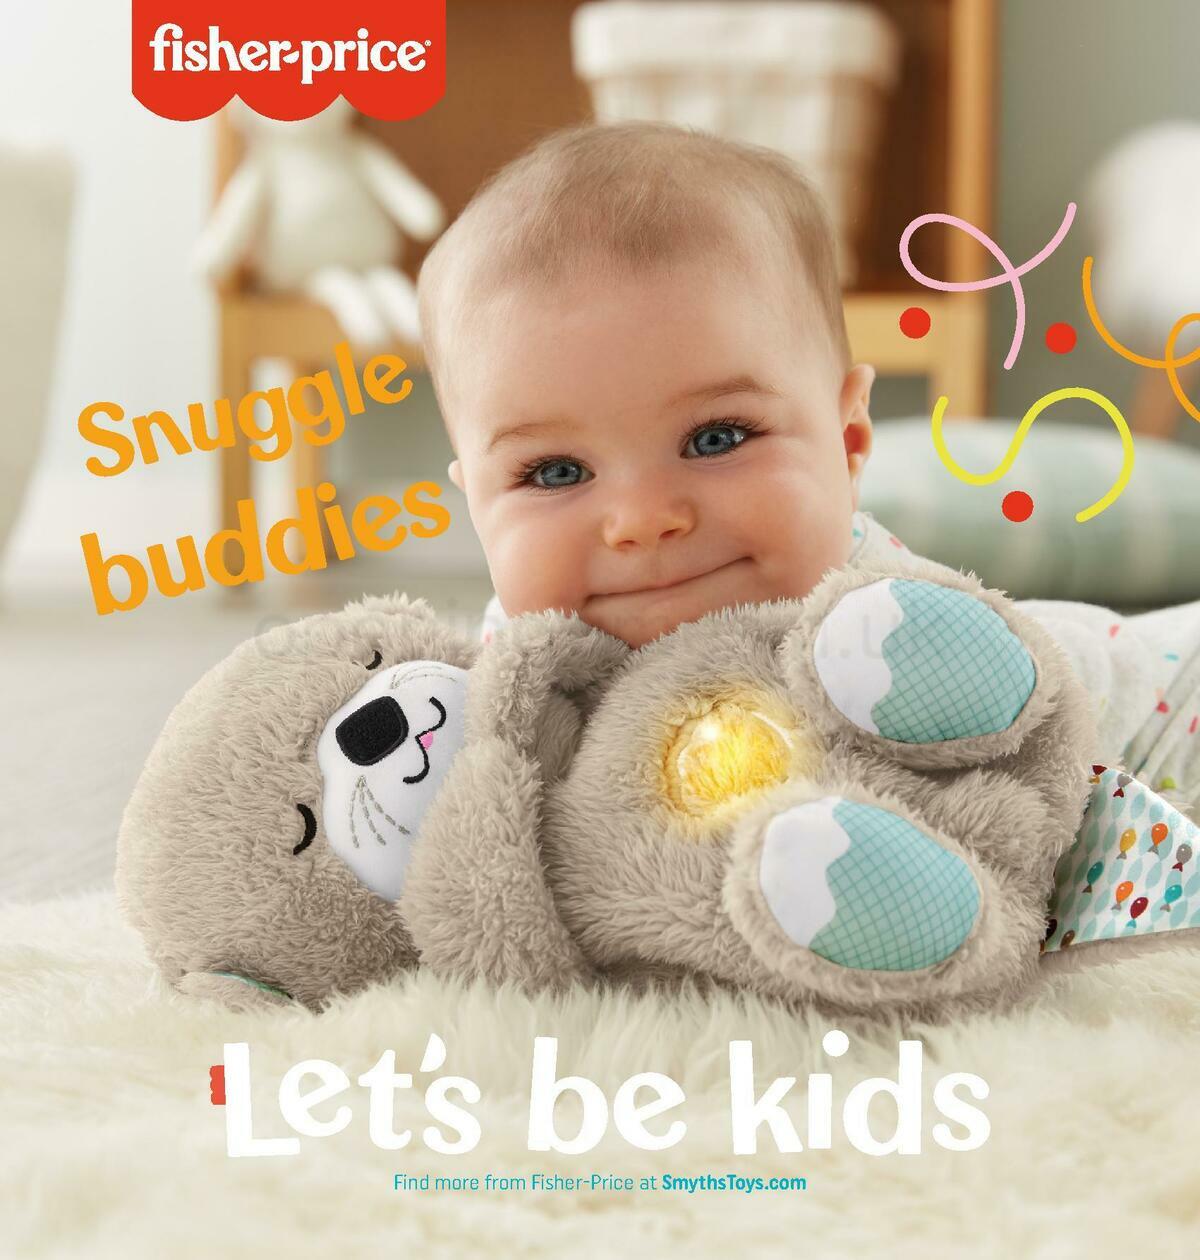 Smyths Toys Baby Catalogue Offers from 1 May